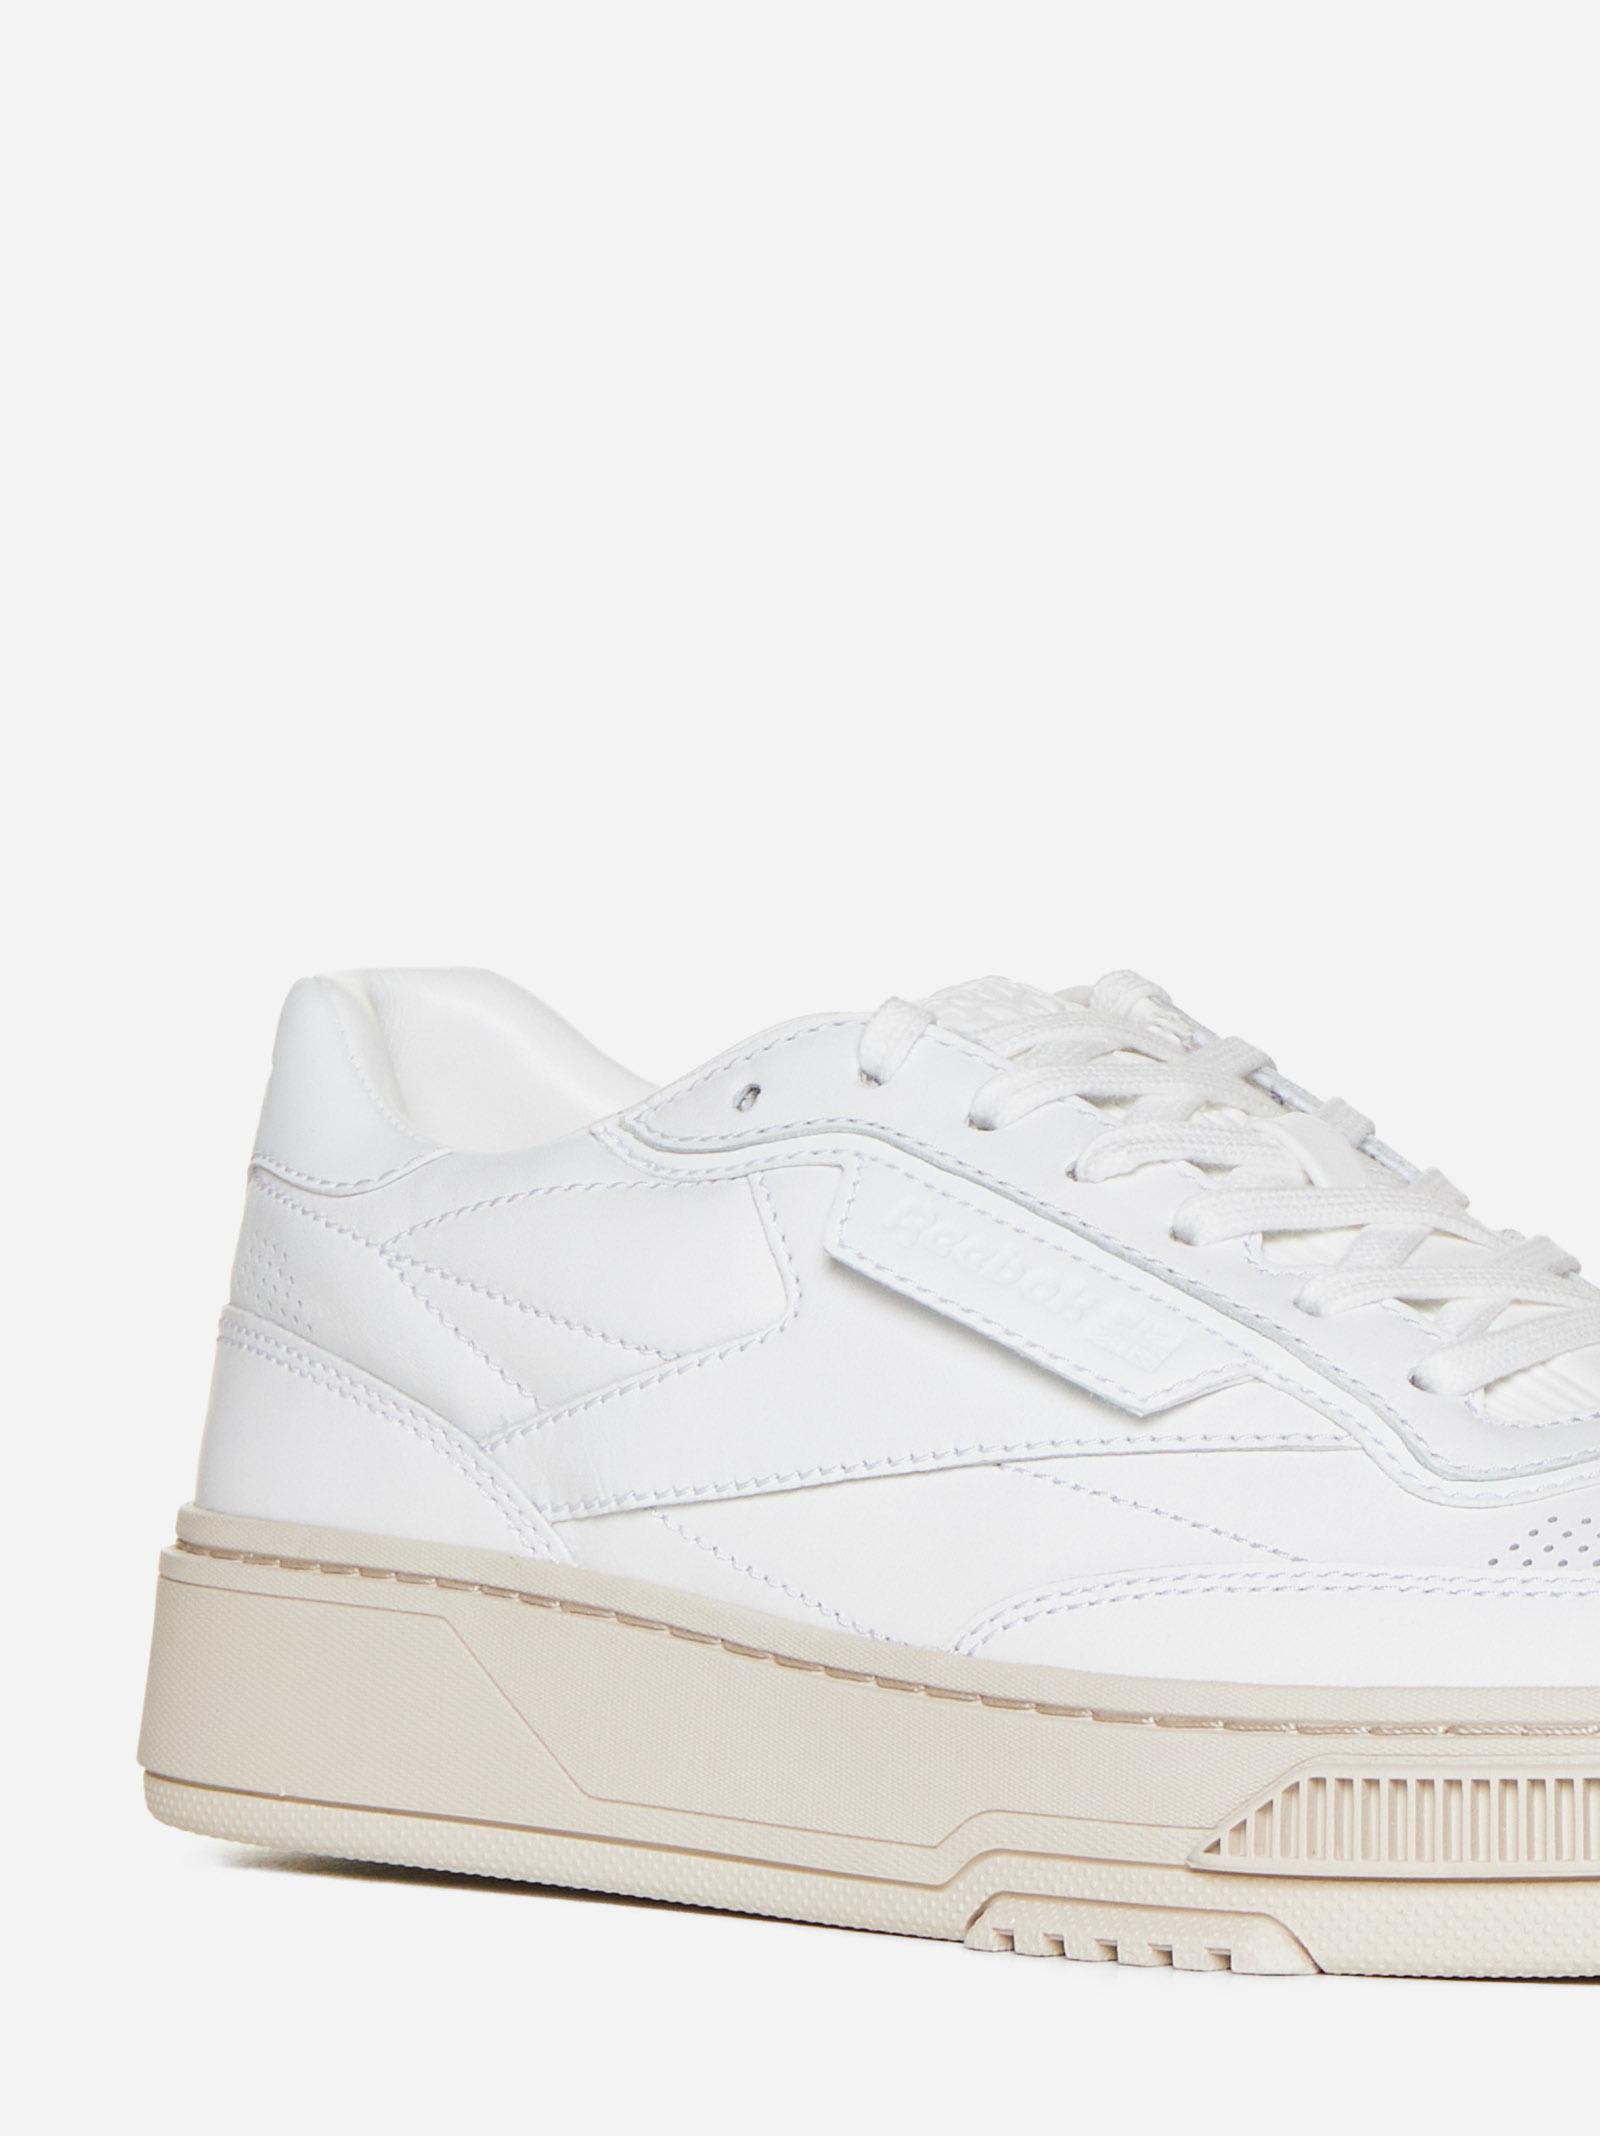 Shop Reebok Club C Ltd Leather Sneakers In White Lthe